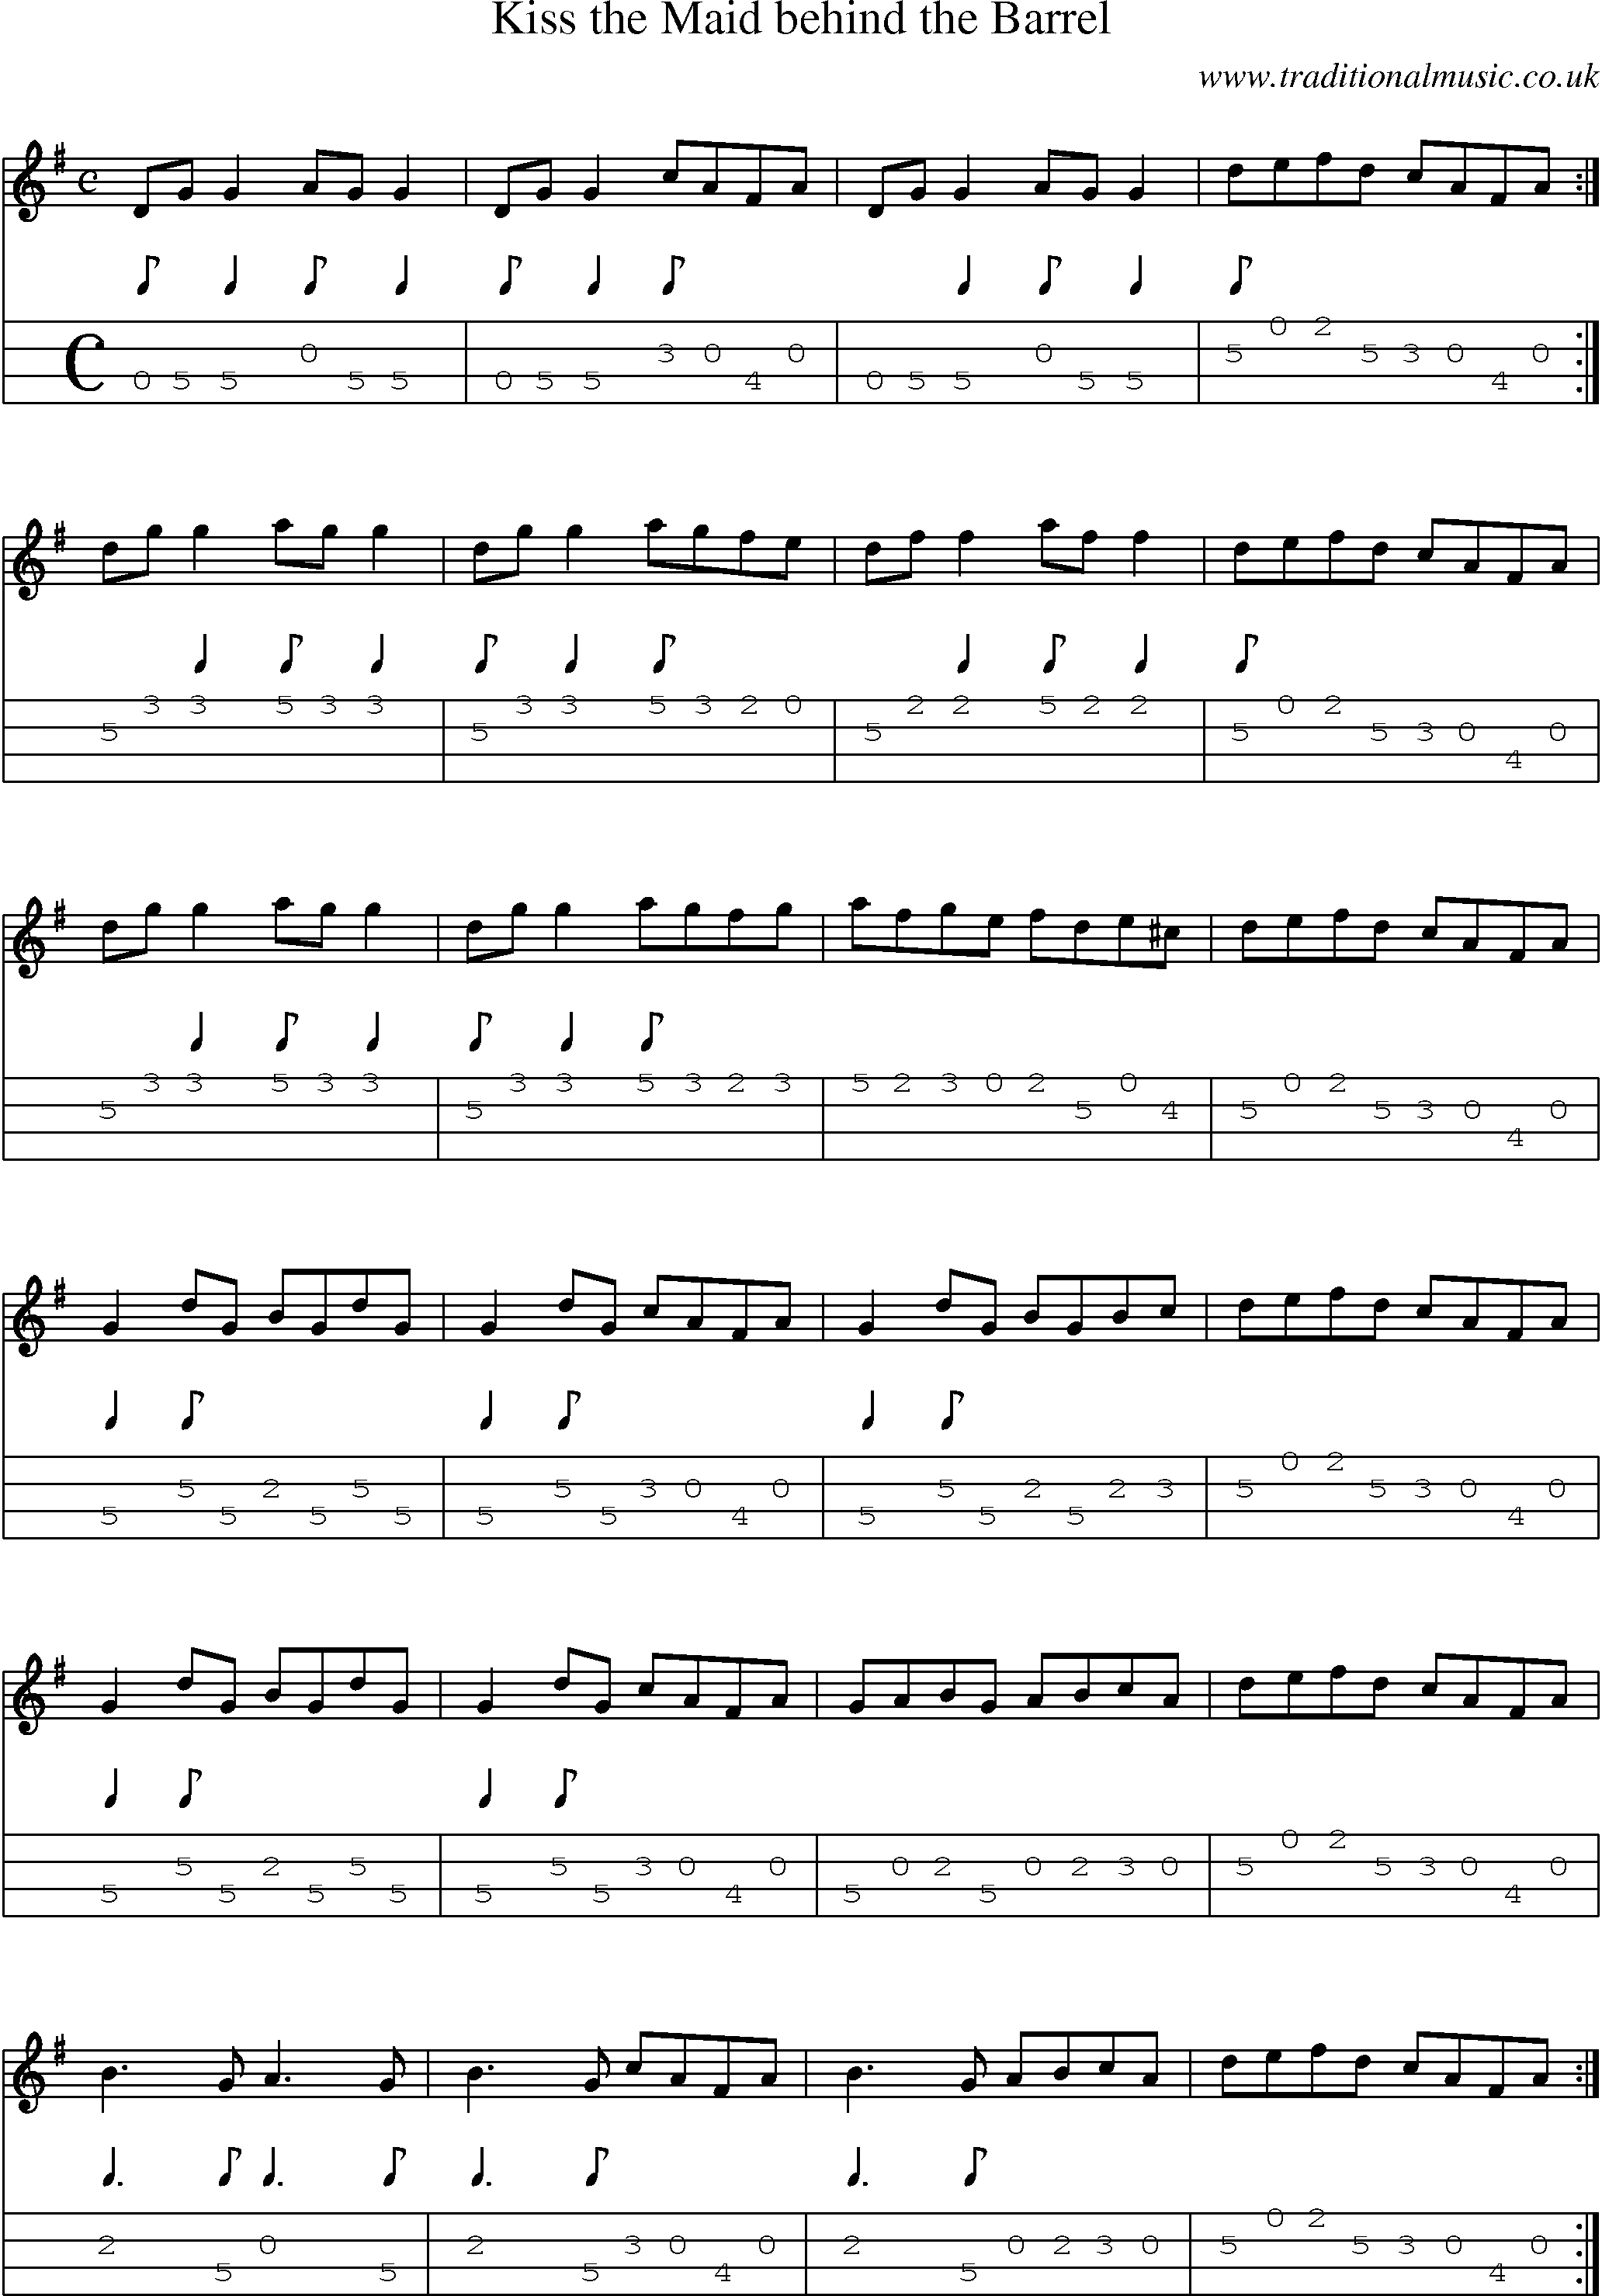 Music Score and Mandolin Tabs for Kiss Maid Behind Barrel